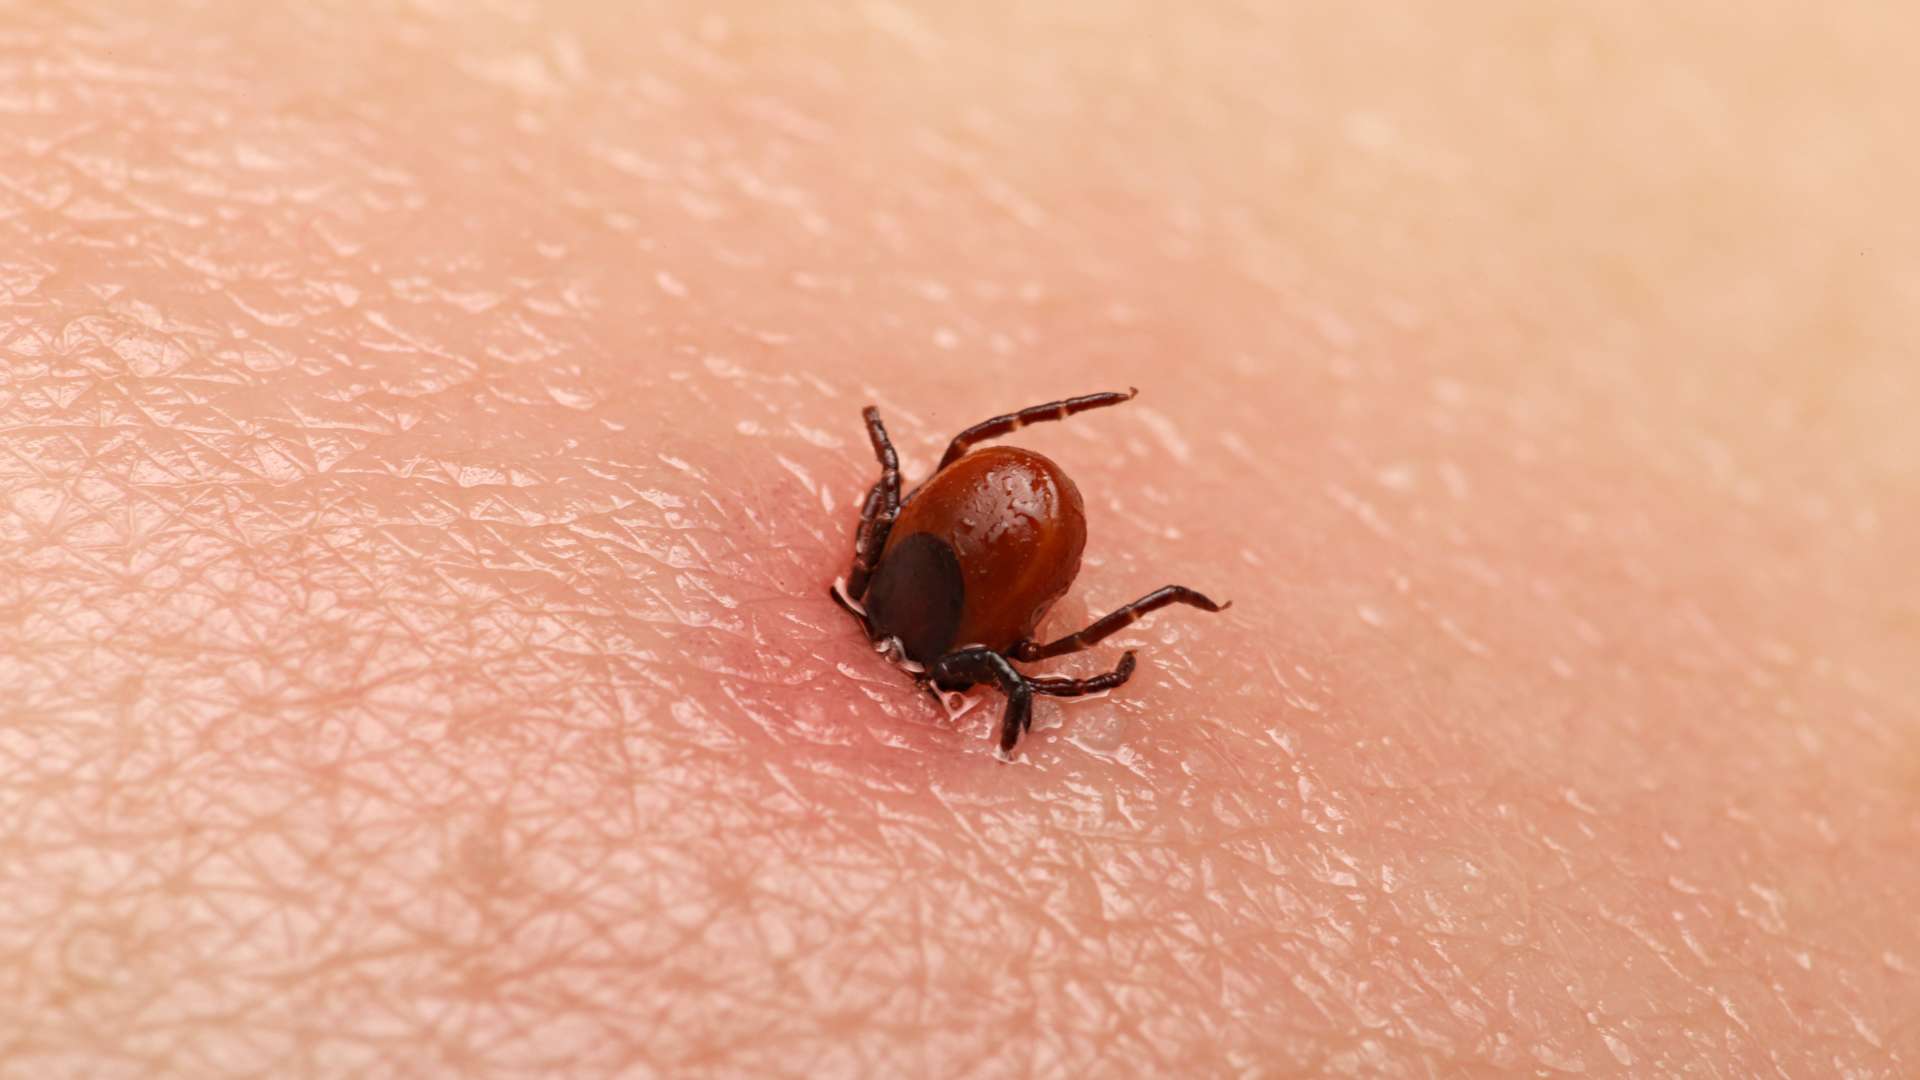 Tick/Insect Bites & Stings